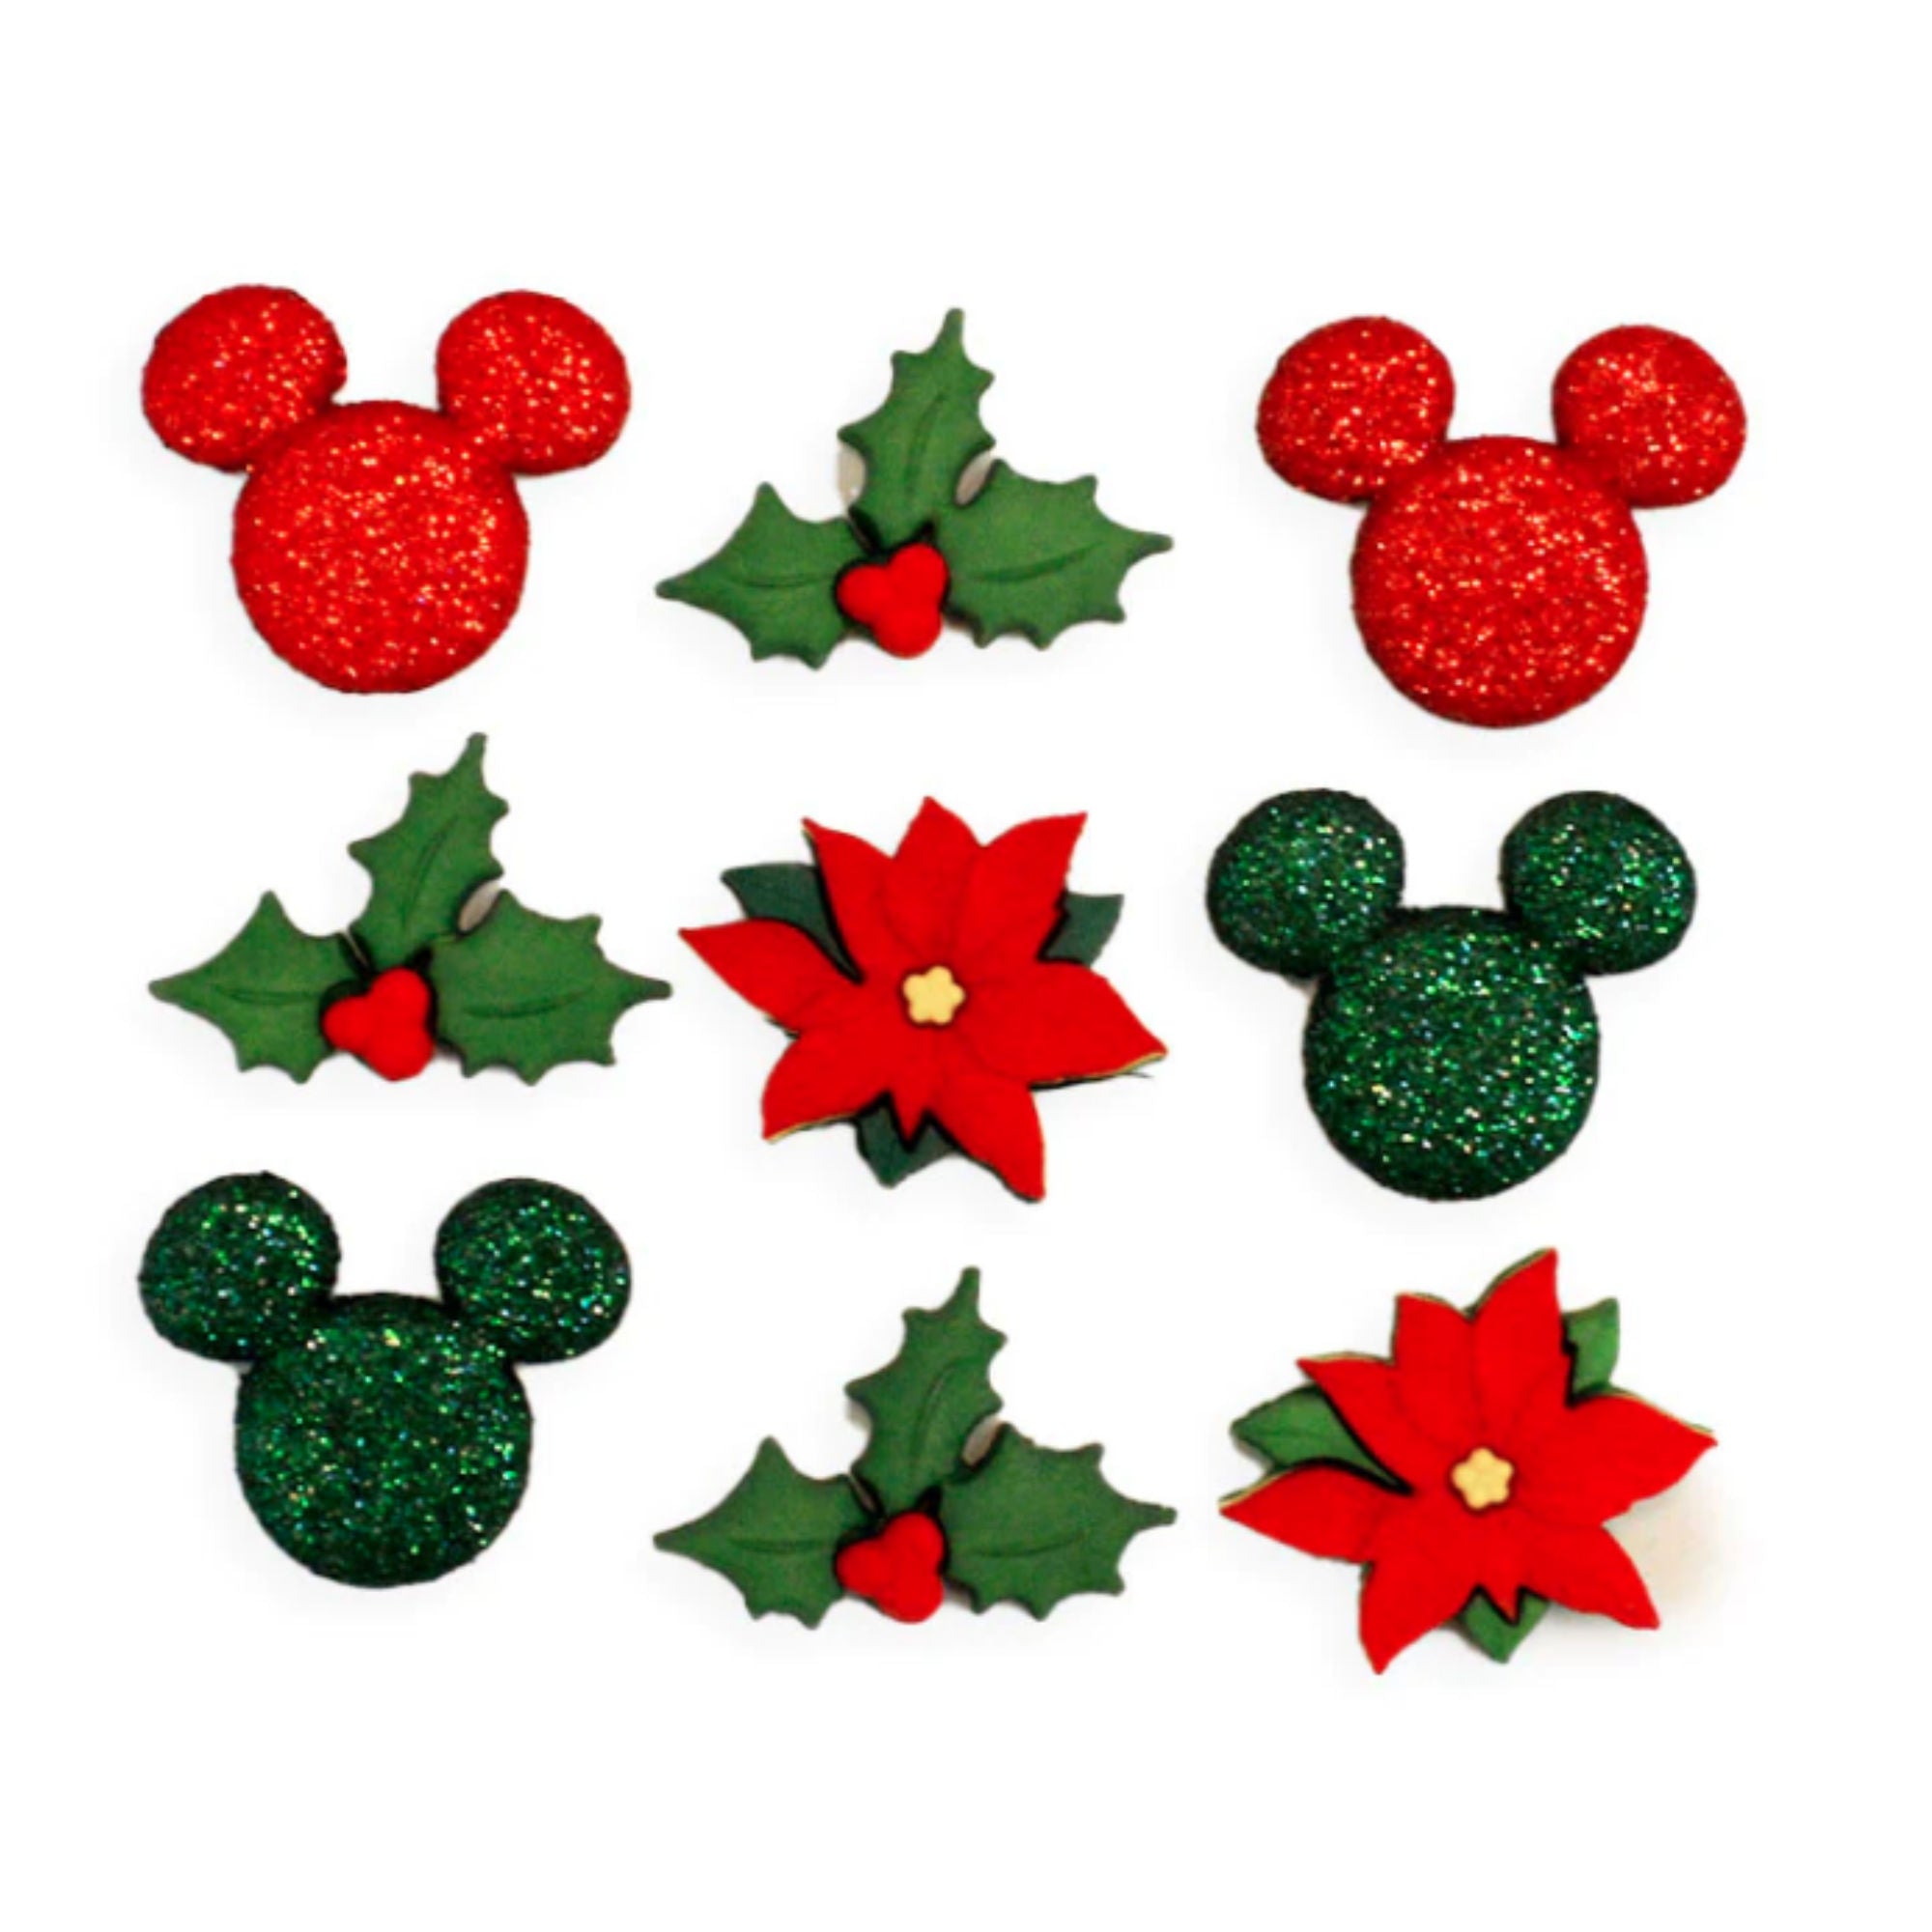 Disney Dress It Up Collection Merry & Bright Christmas Scrapbook Buttons by Jesse James Buttons